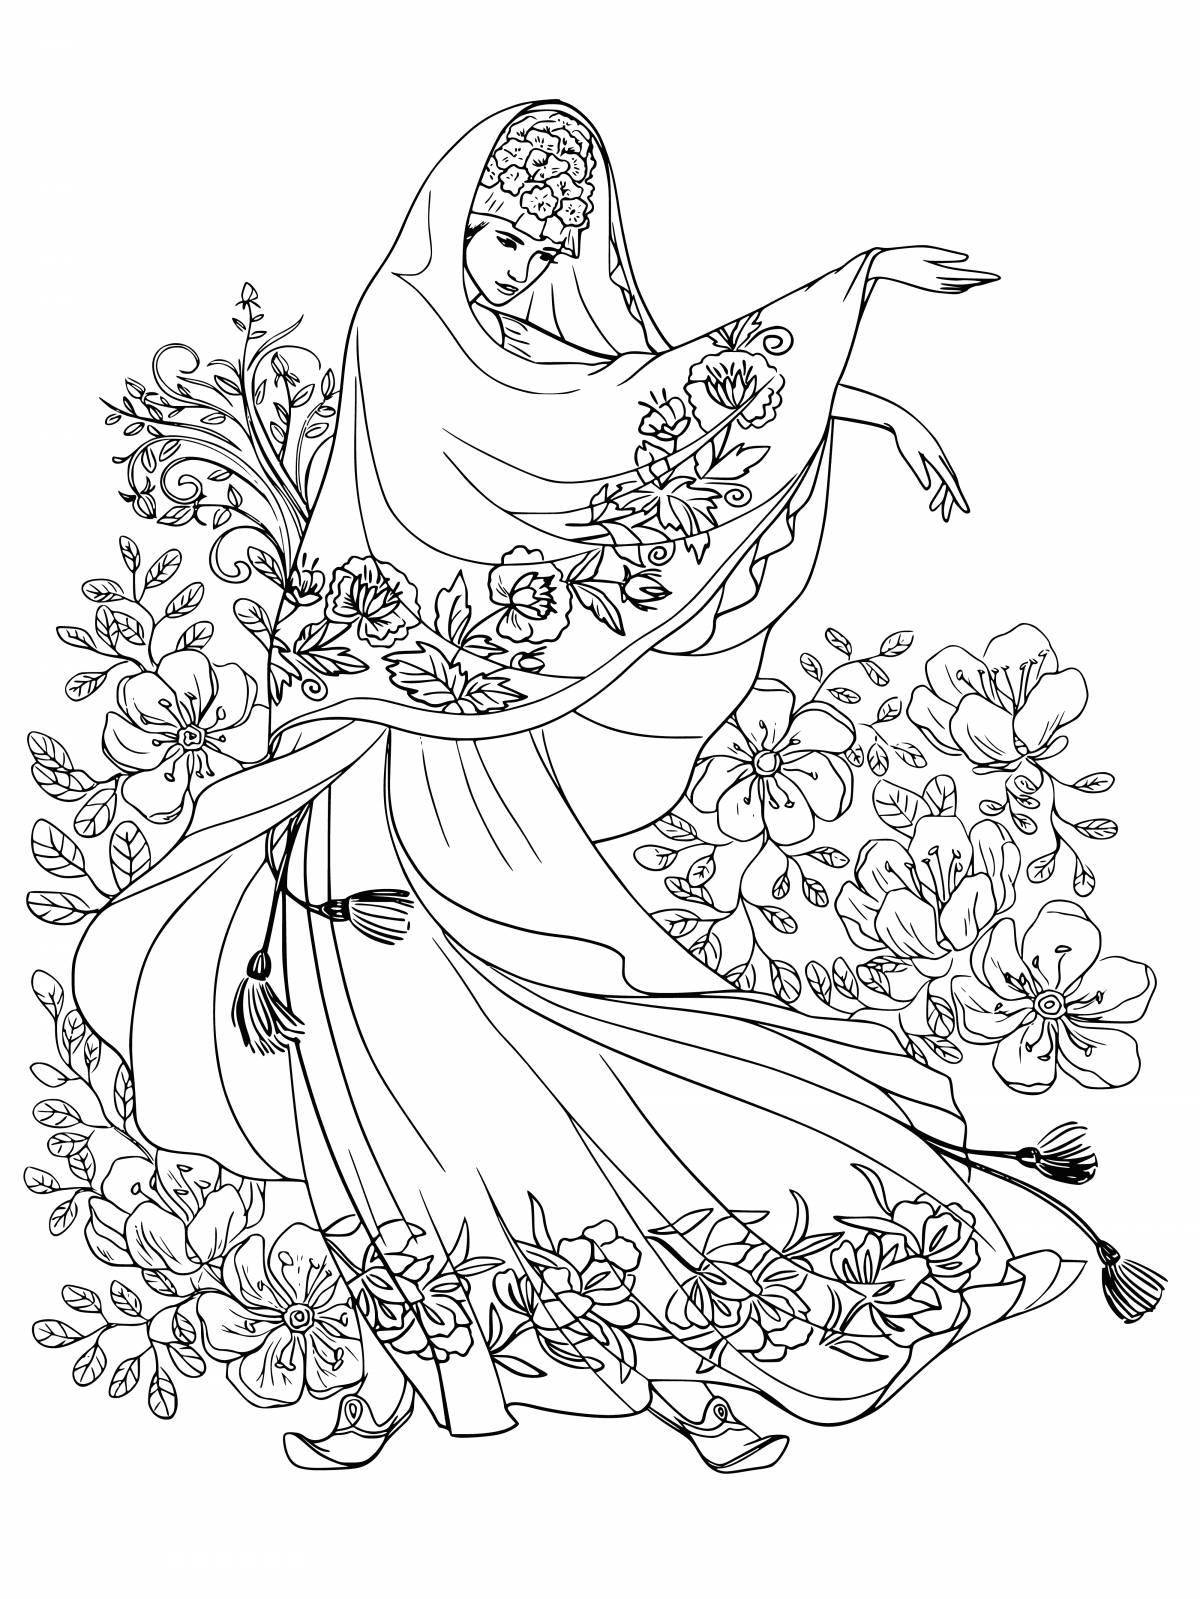 Amazing oriental beauty coloring book